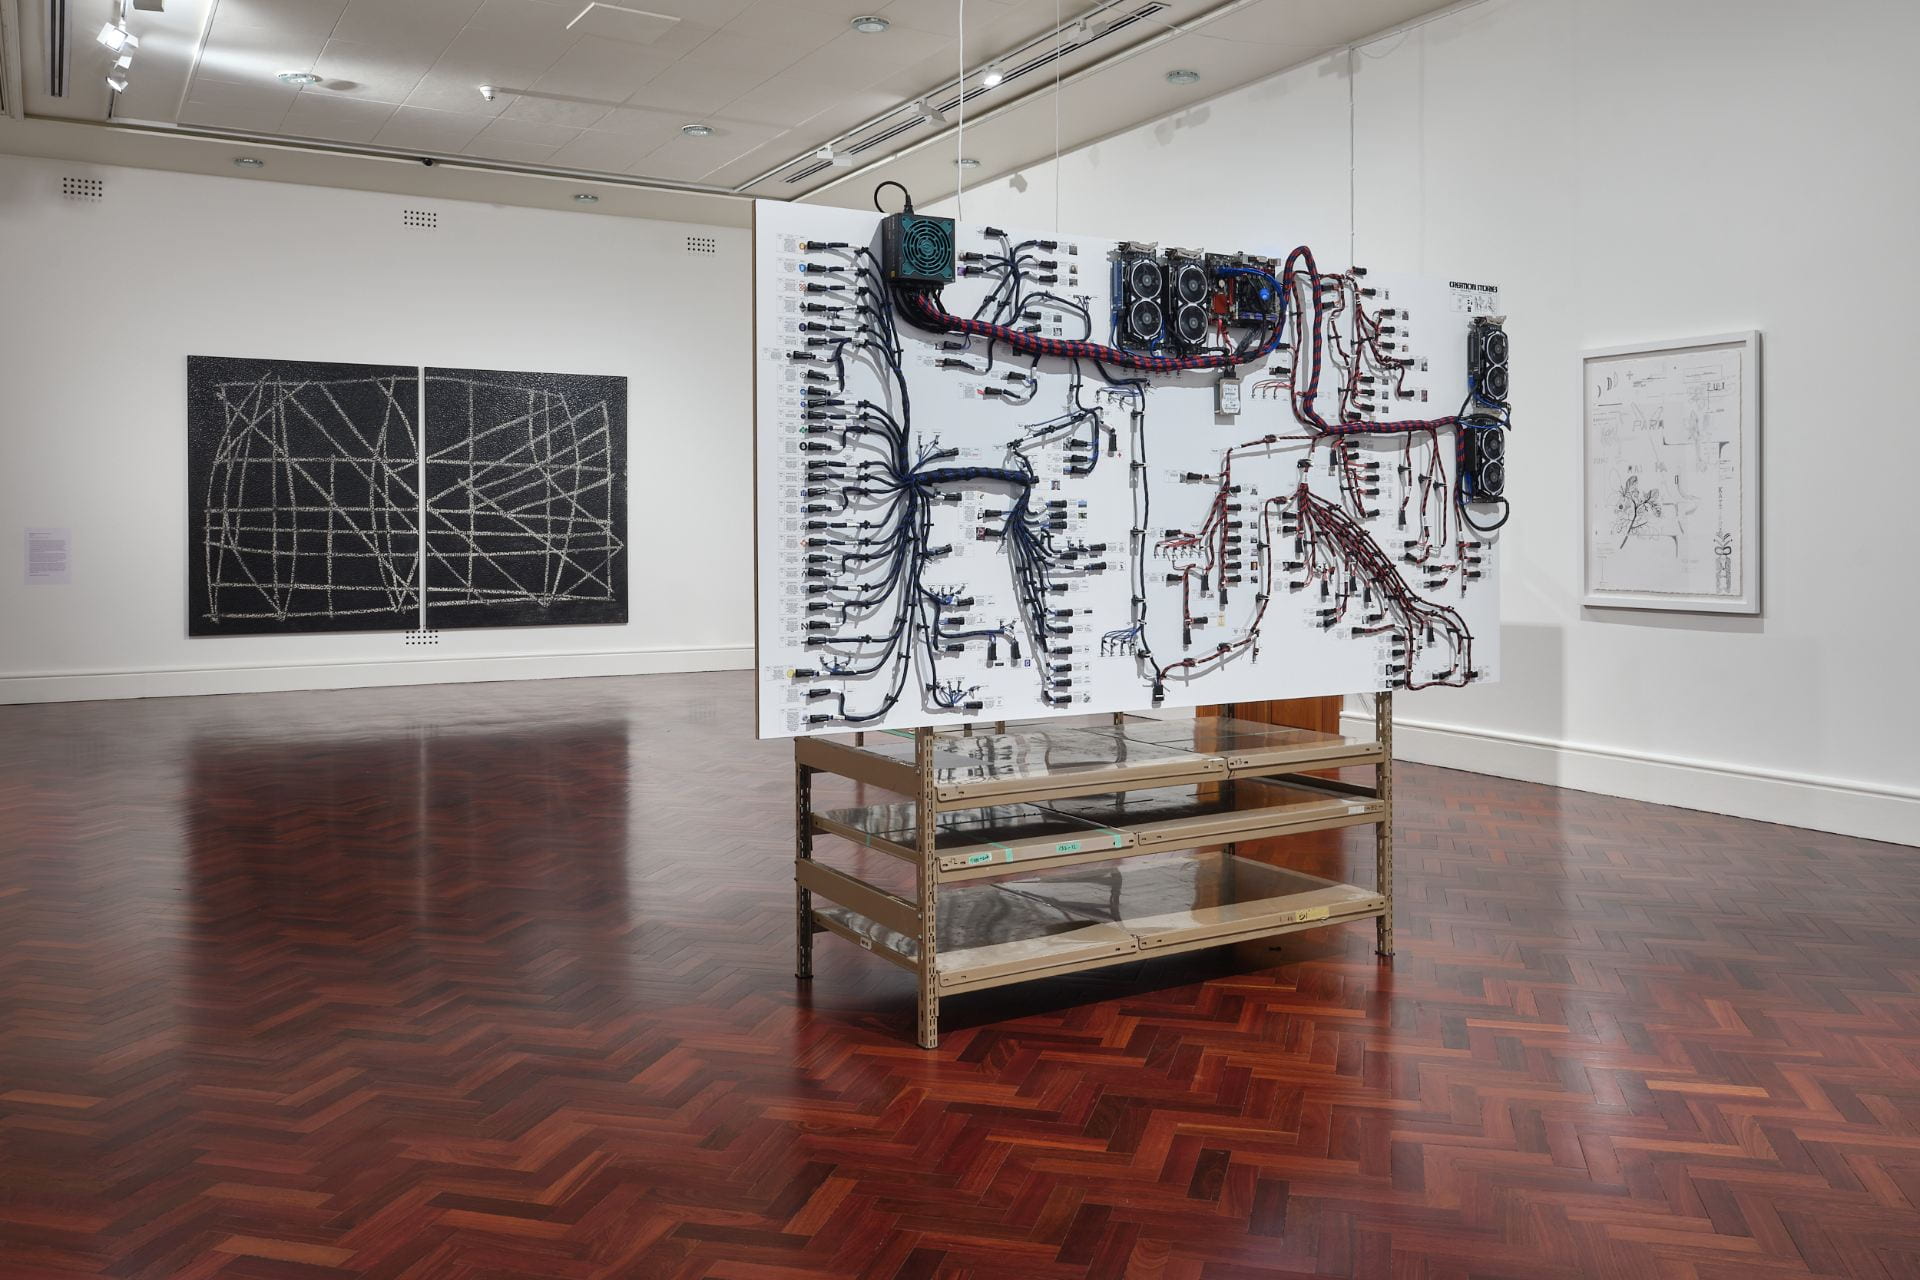 A large board covered in cables and diagrams is attached to a brown metal shelving unit and stands in the middle of a white gallery space.